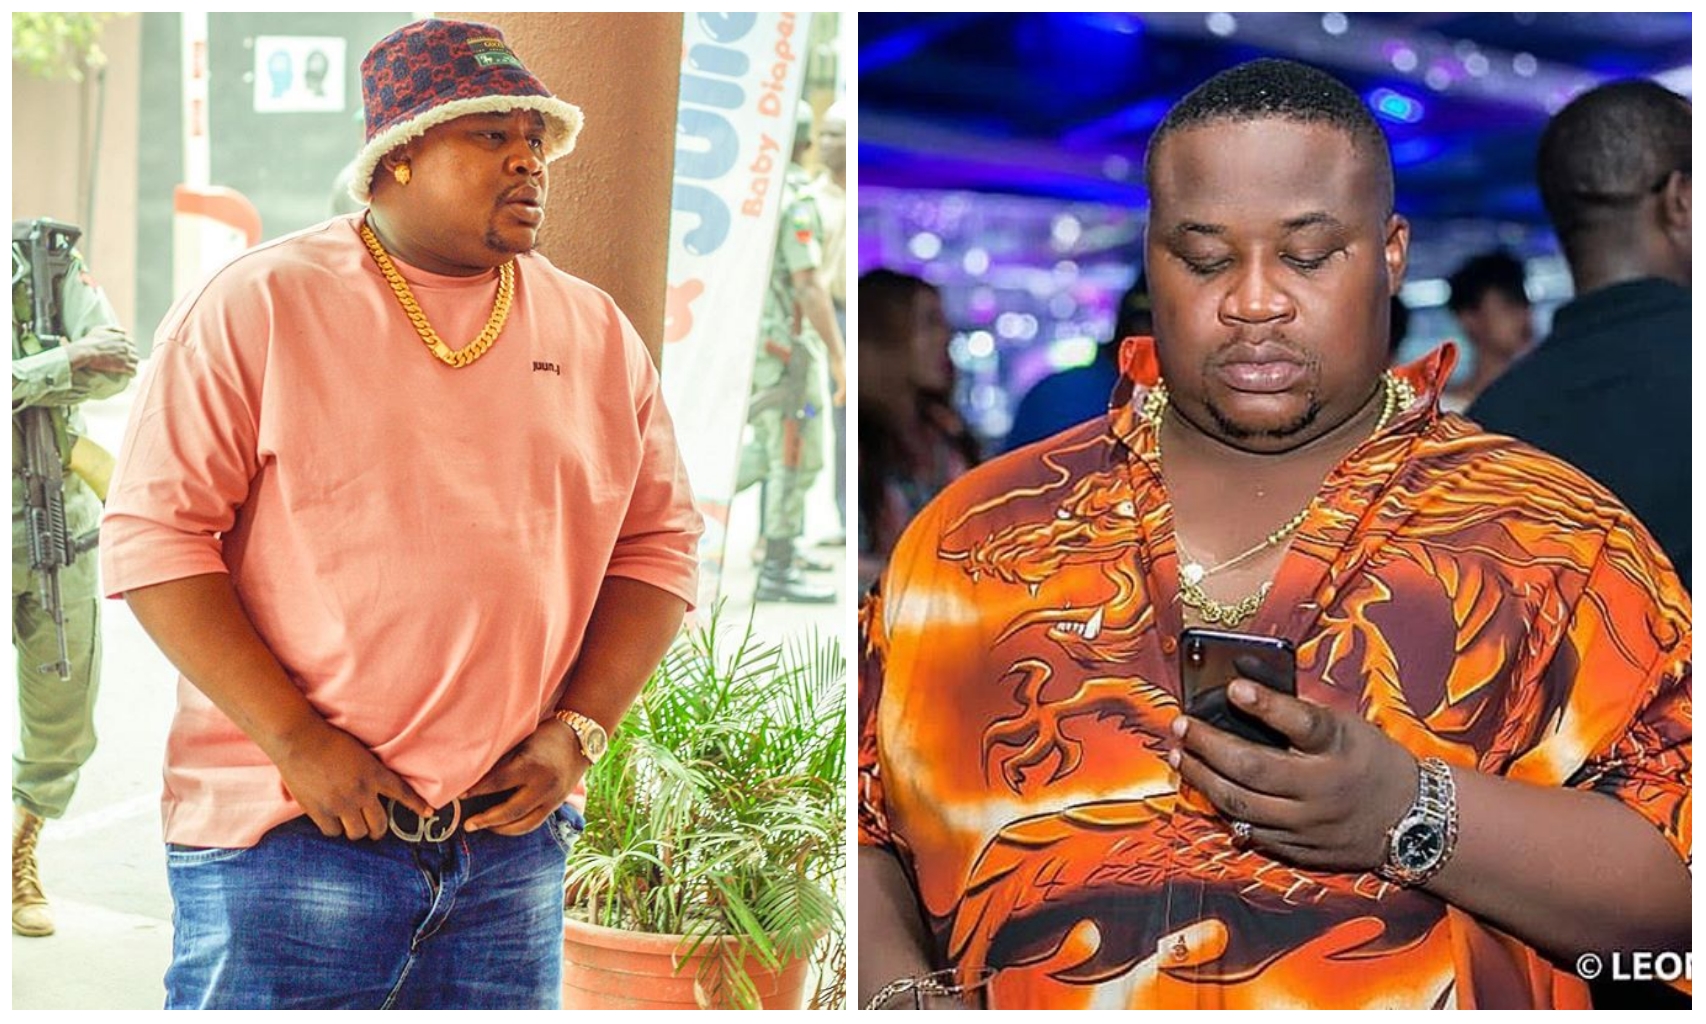 Cubana Chief Priest blast ladies accusing celebrity of rape says it's an act of gold digging